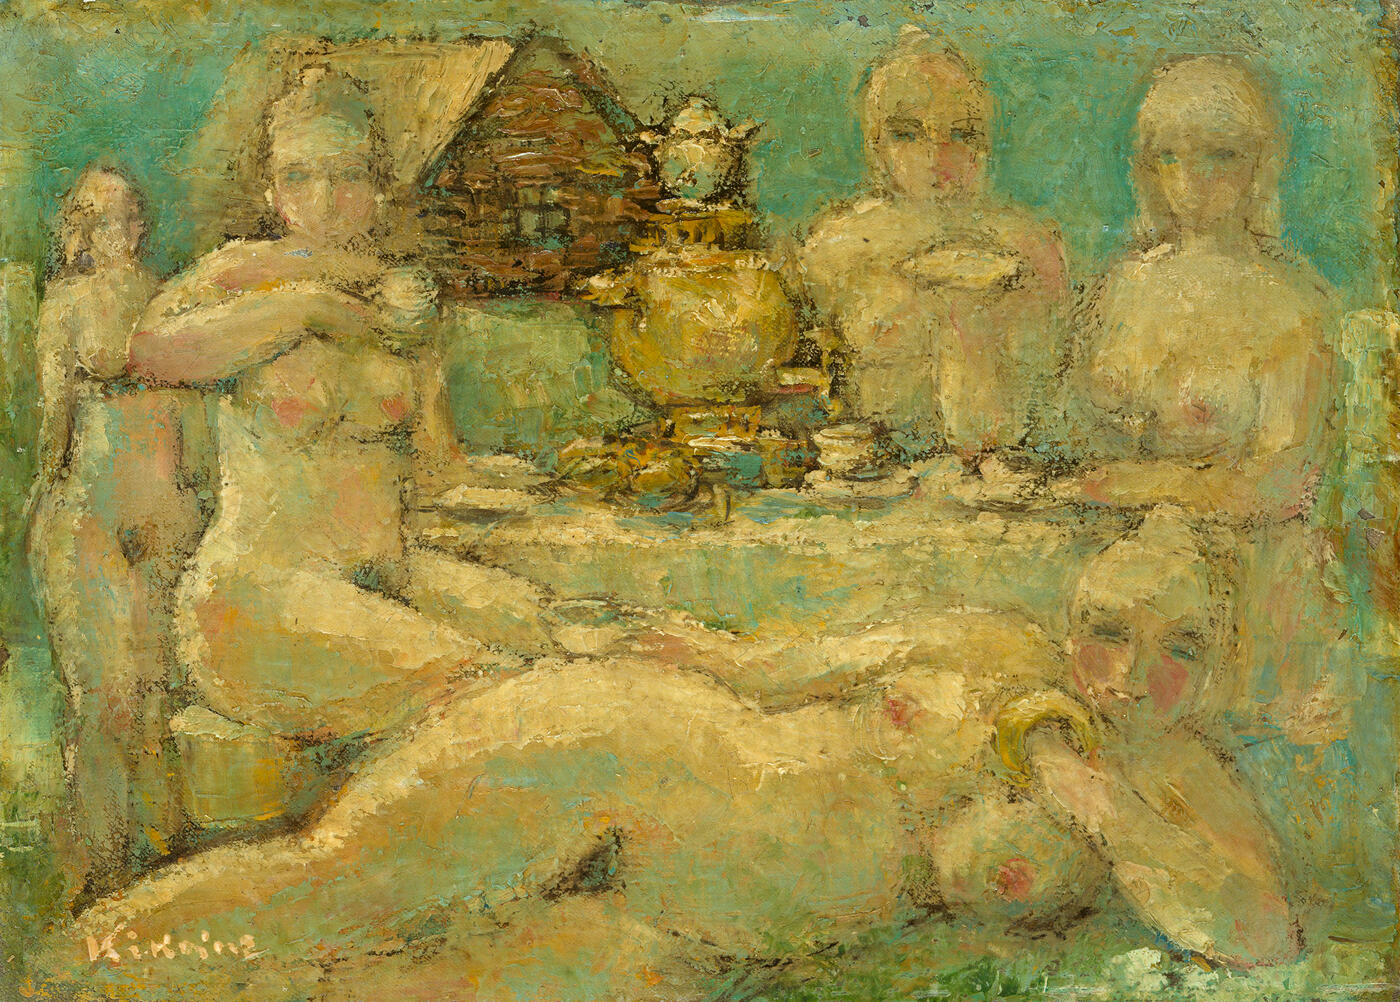 Nudes by the Tea Table